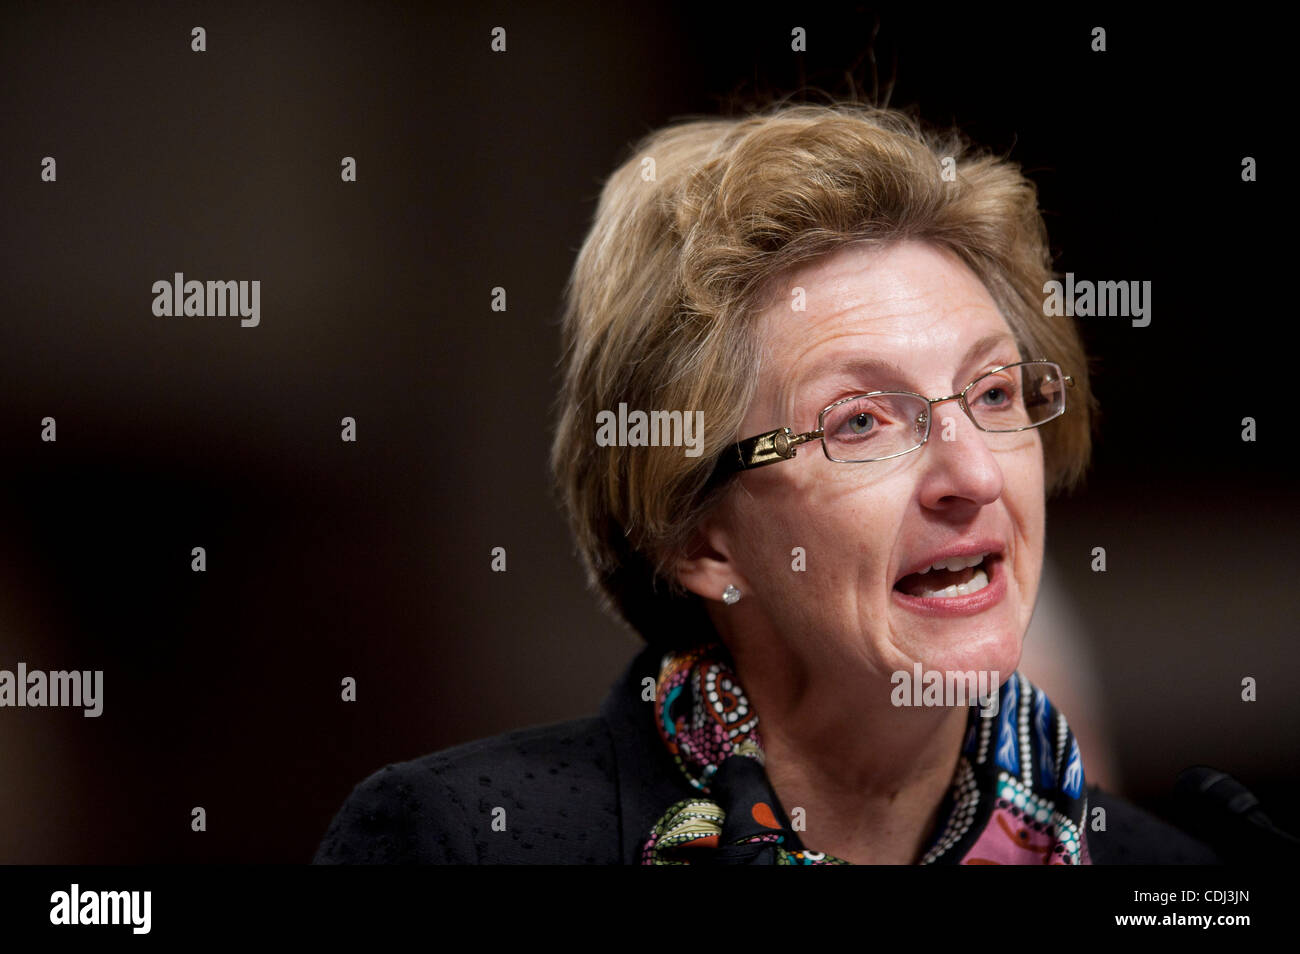 Feb 15, 2011 - Washington, District of Columbia, U.S. - Dr. JO ANN ROONEY testifies before a Senate Armed Services Committee Hearing her nomination to serve as Principal Deputy Undersecretary of Defense for Personnel and Readiness. (Credit Image: © Pete Marovich/ZUMAPRESS.com) Stock Photo